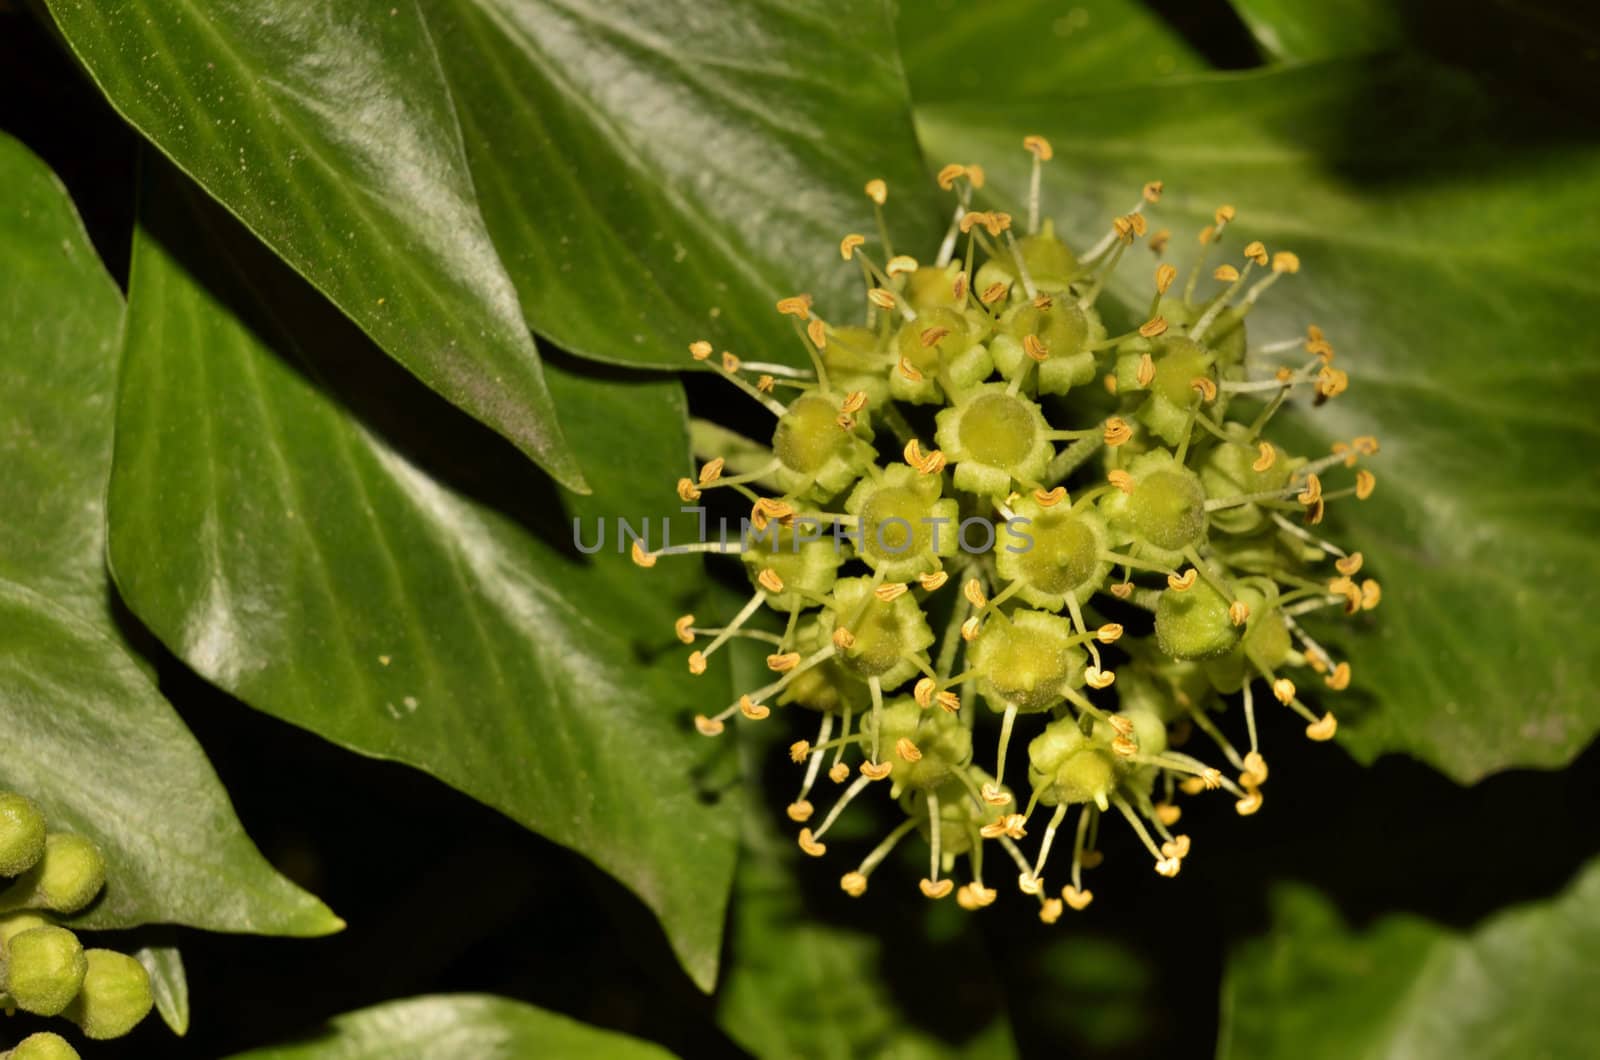 This photo present hedera helix flower on a leaf background.